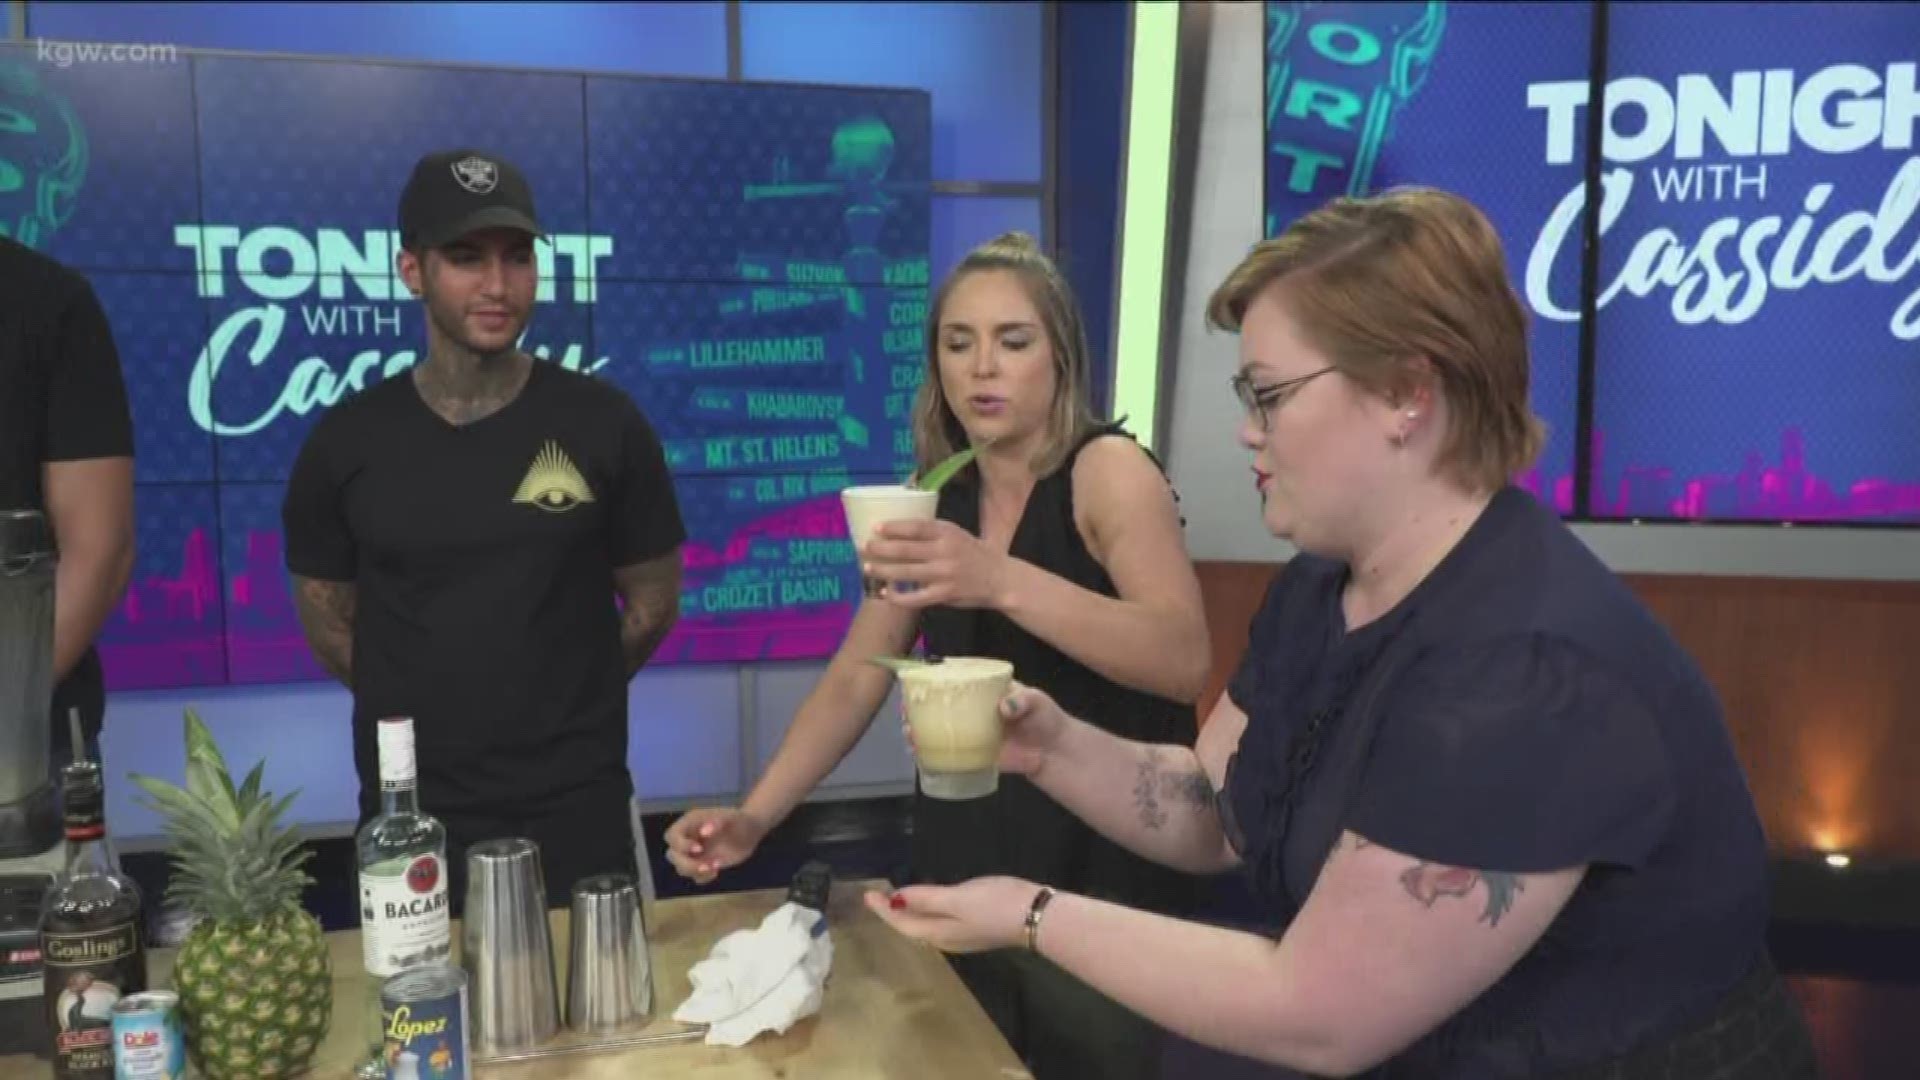 National Piña Colada is on July 10th. Learn to make the perfect Piña Colada with the help of the upcoming bar Two Wrongs.  
#TonightwithCassidy
2wrongs2.com
#TonightwithCassidy